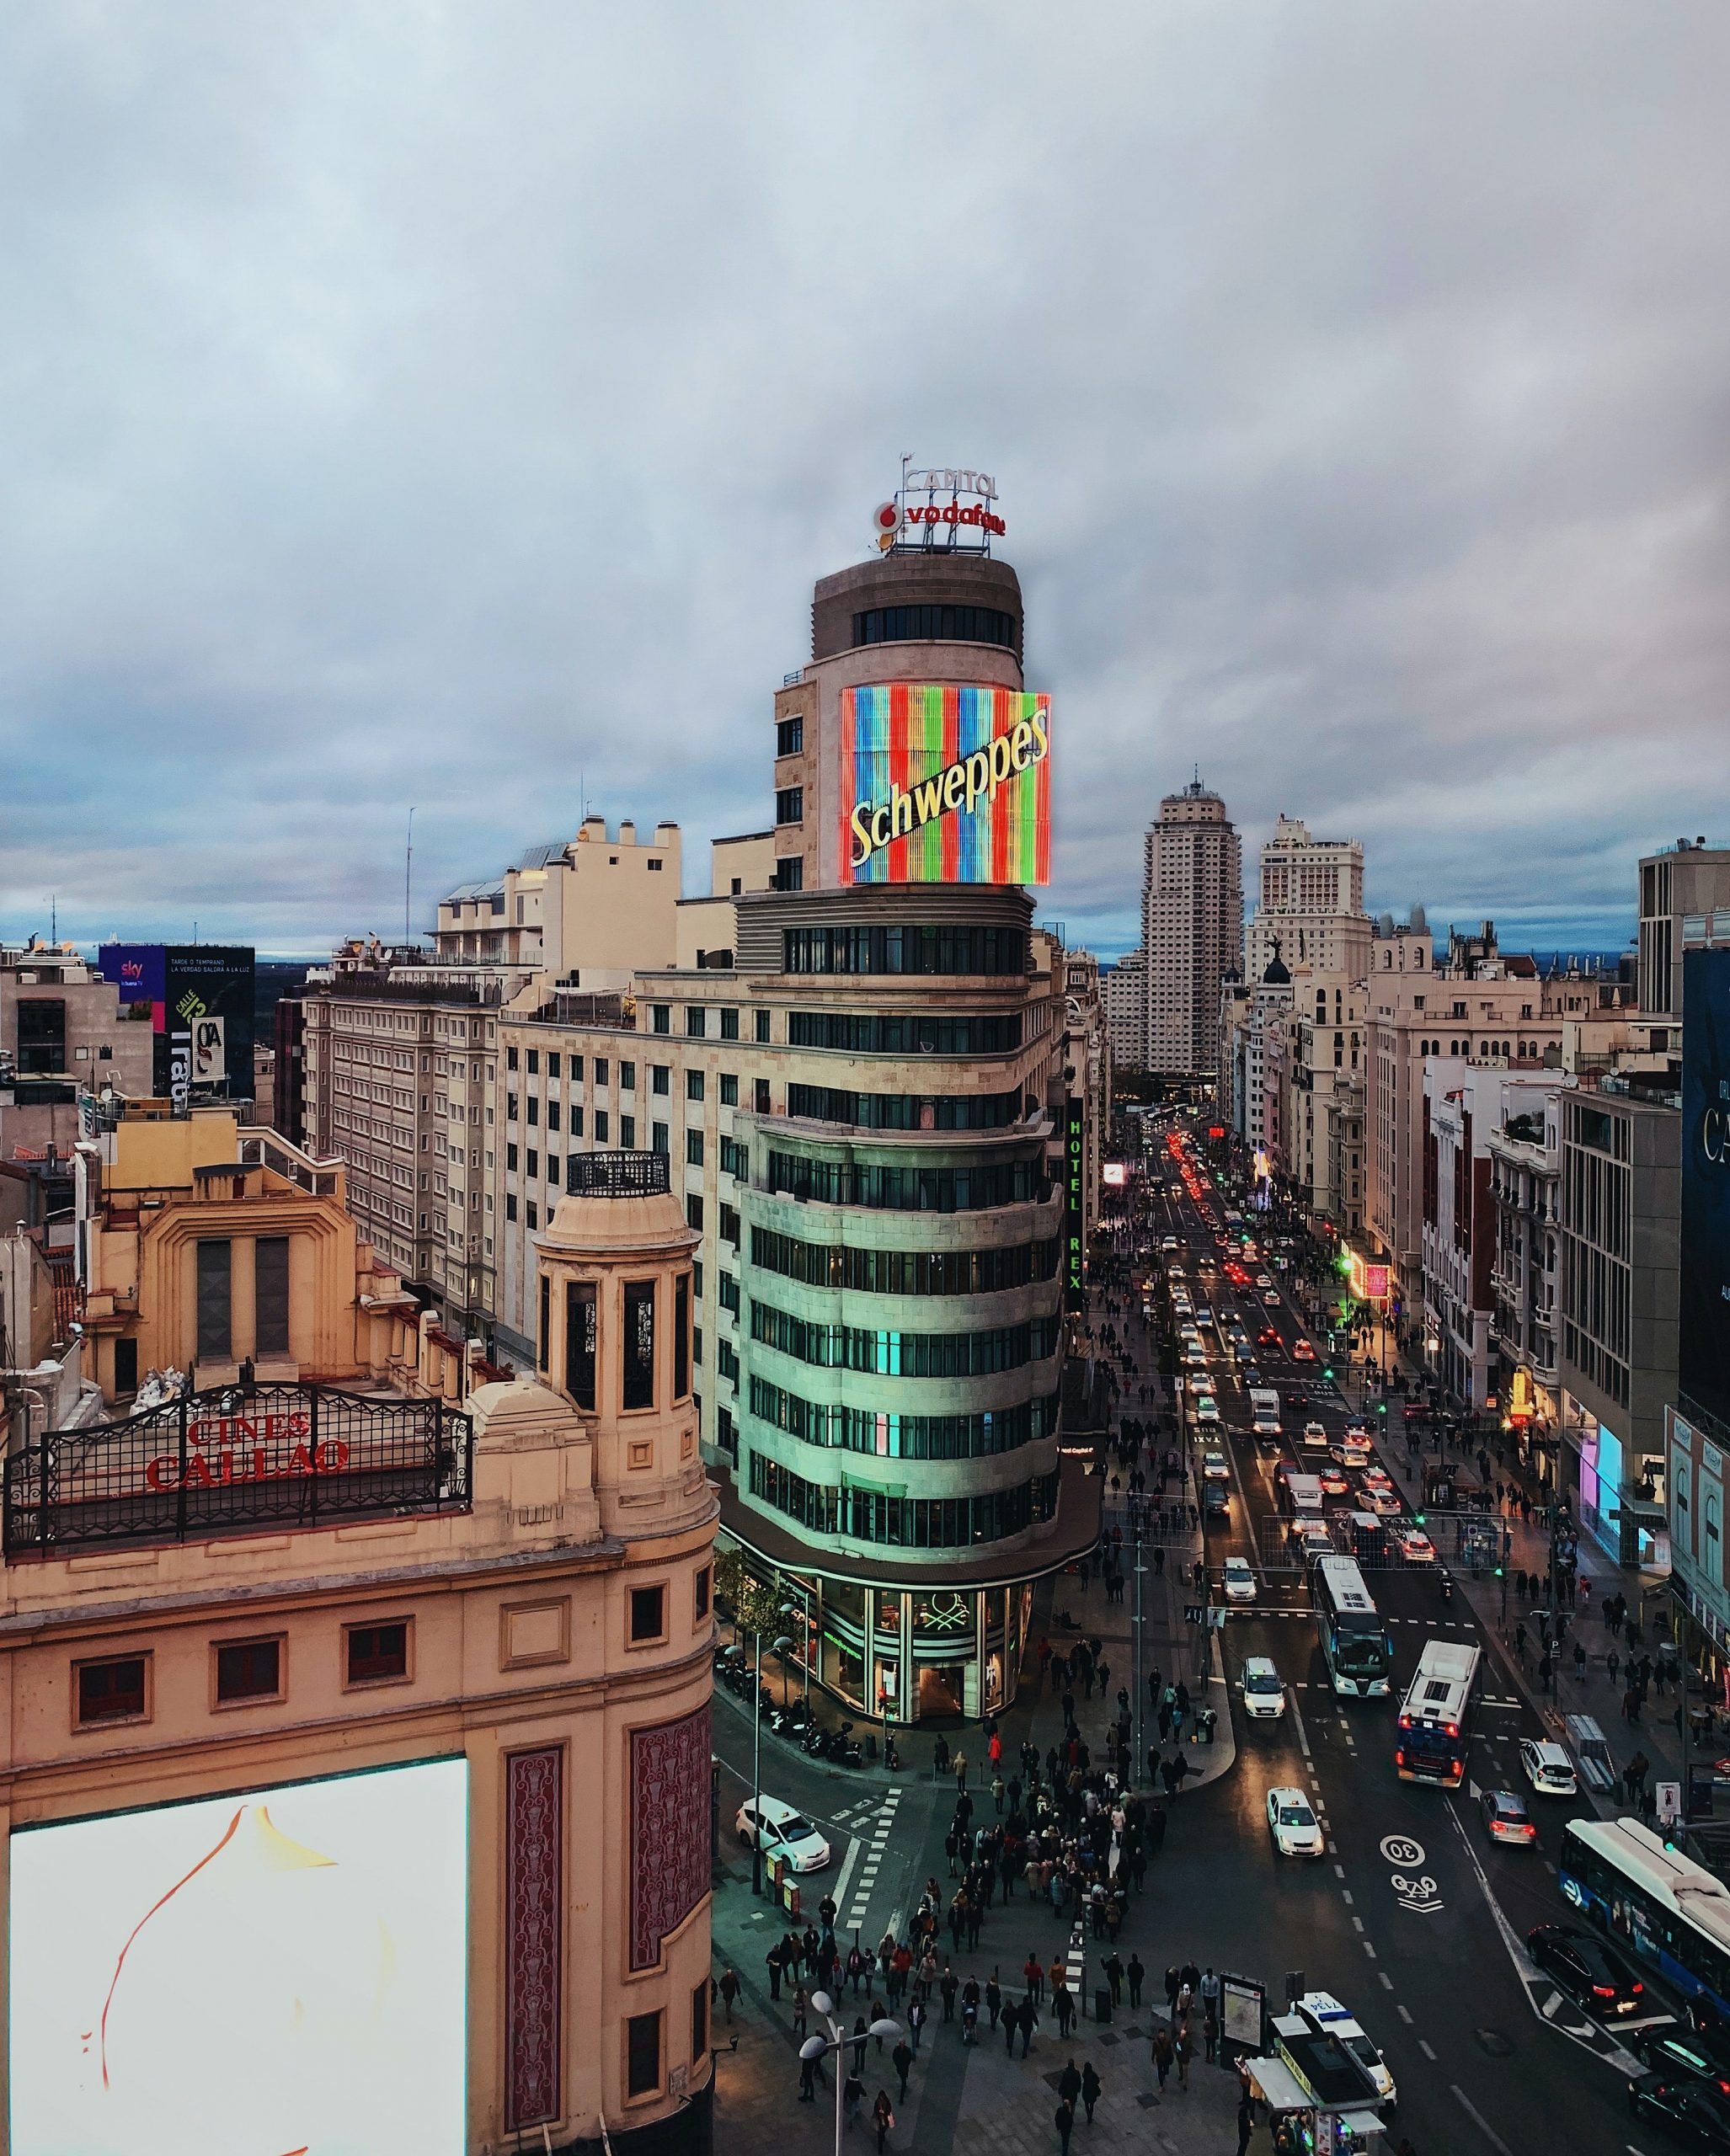 Callao Madrid self guided walking tour